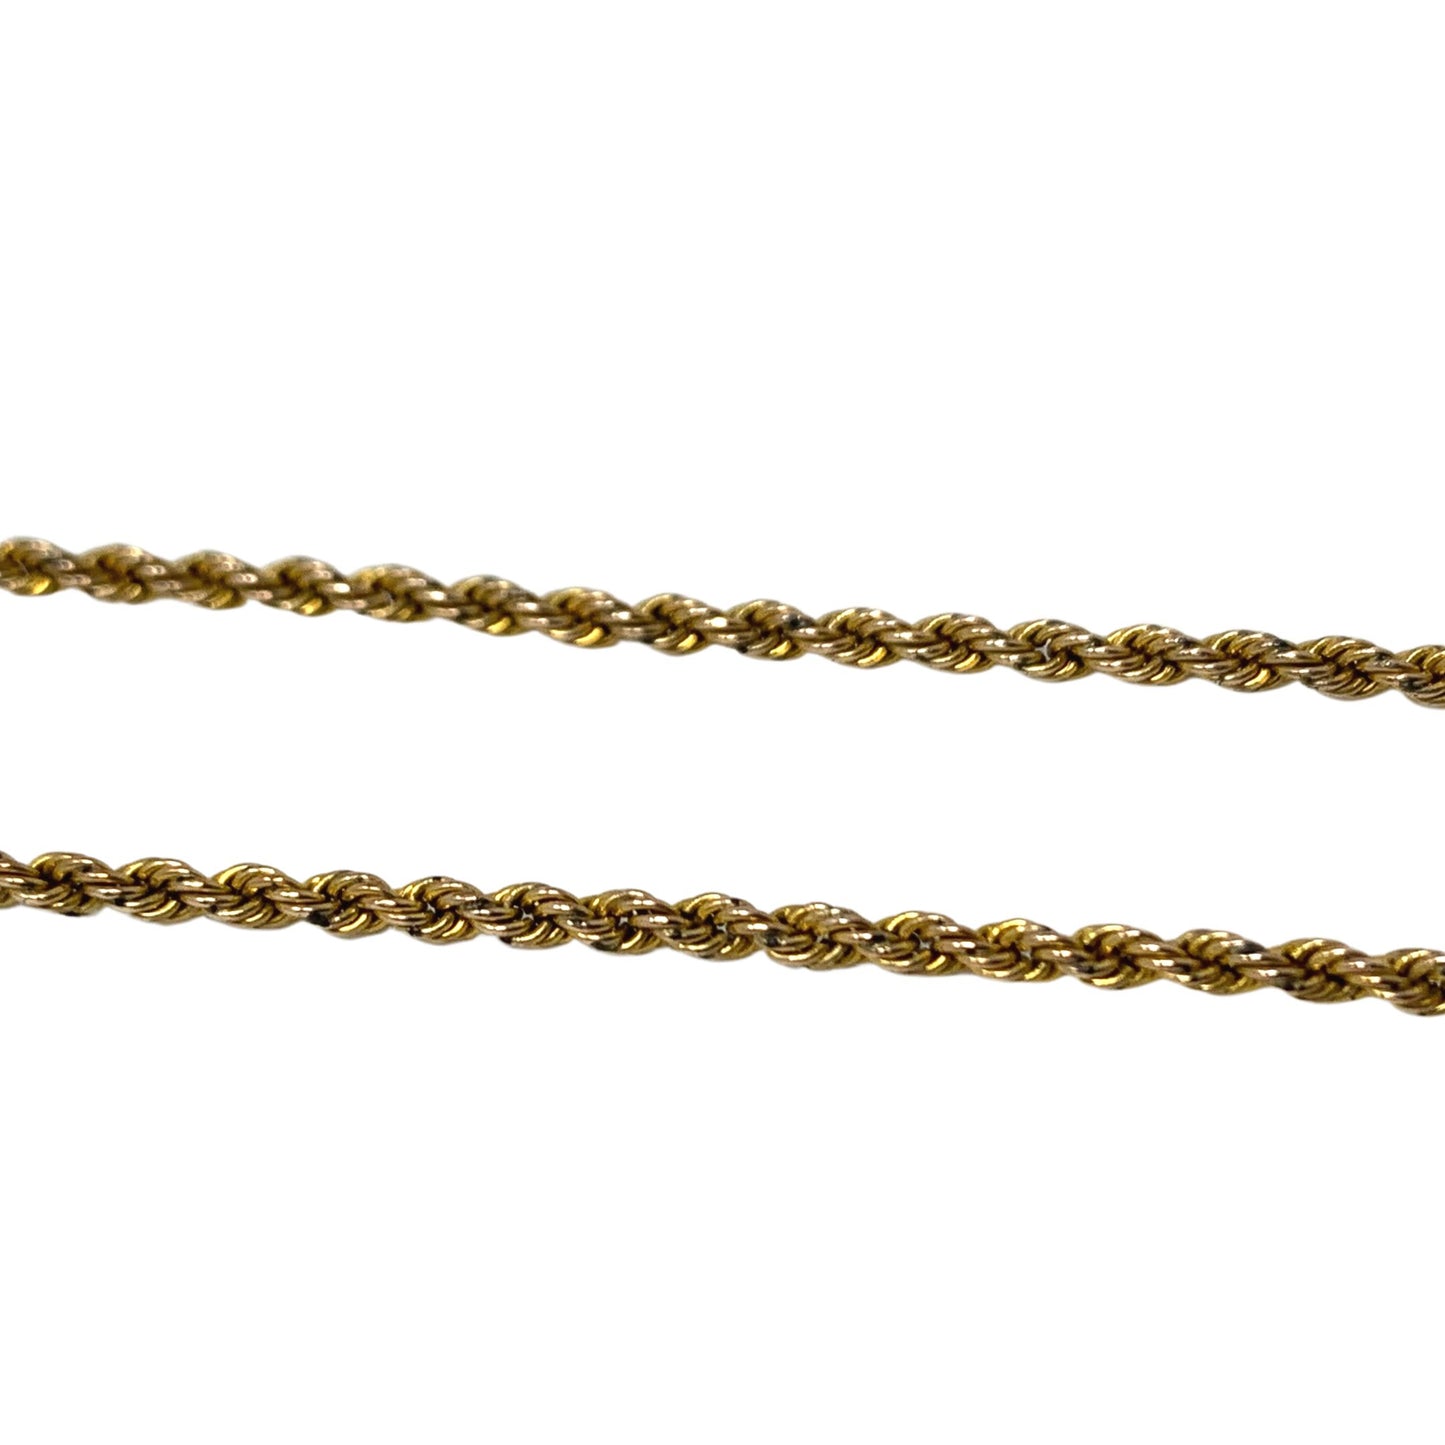 MS&S 49" Gold Filled Rope Pocket Watch Chain